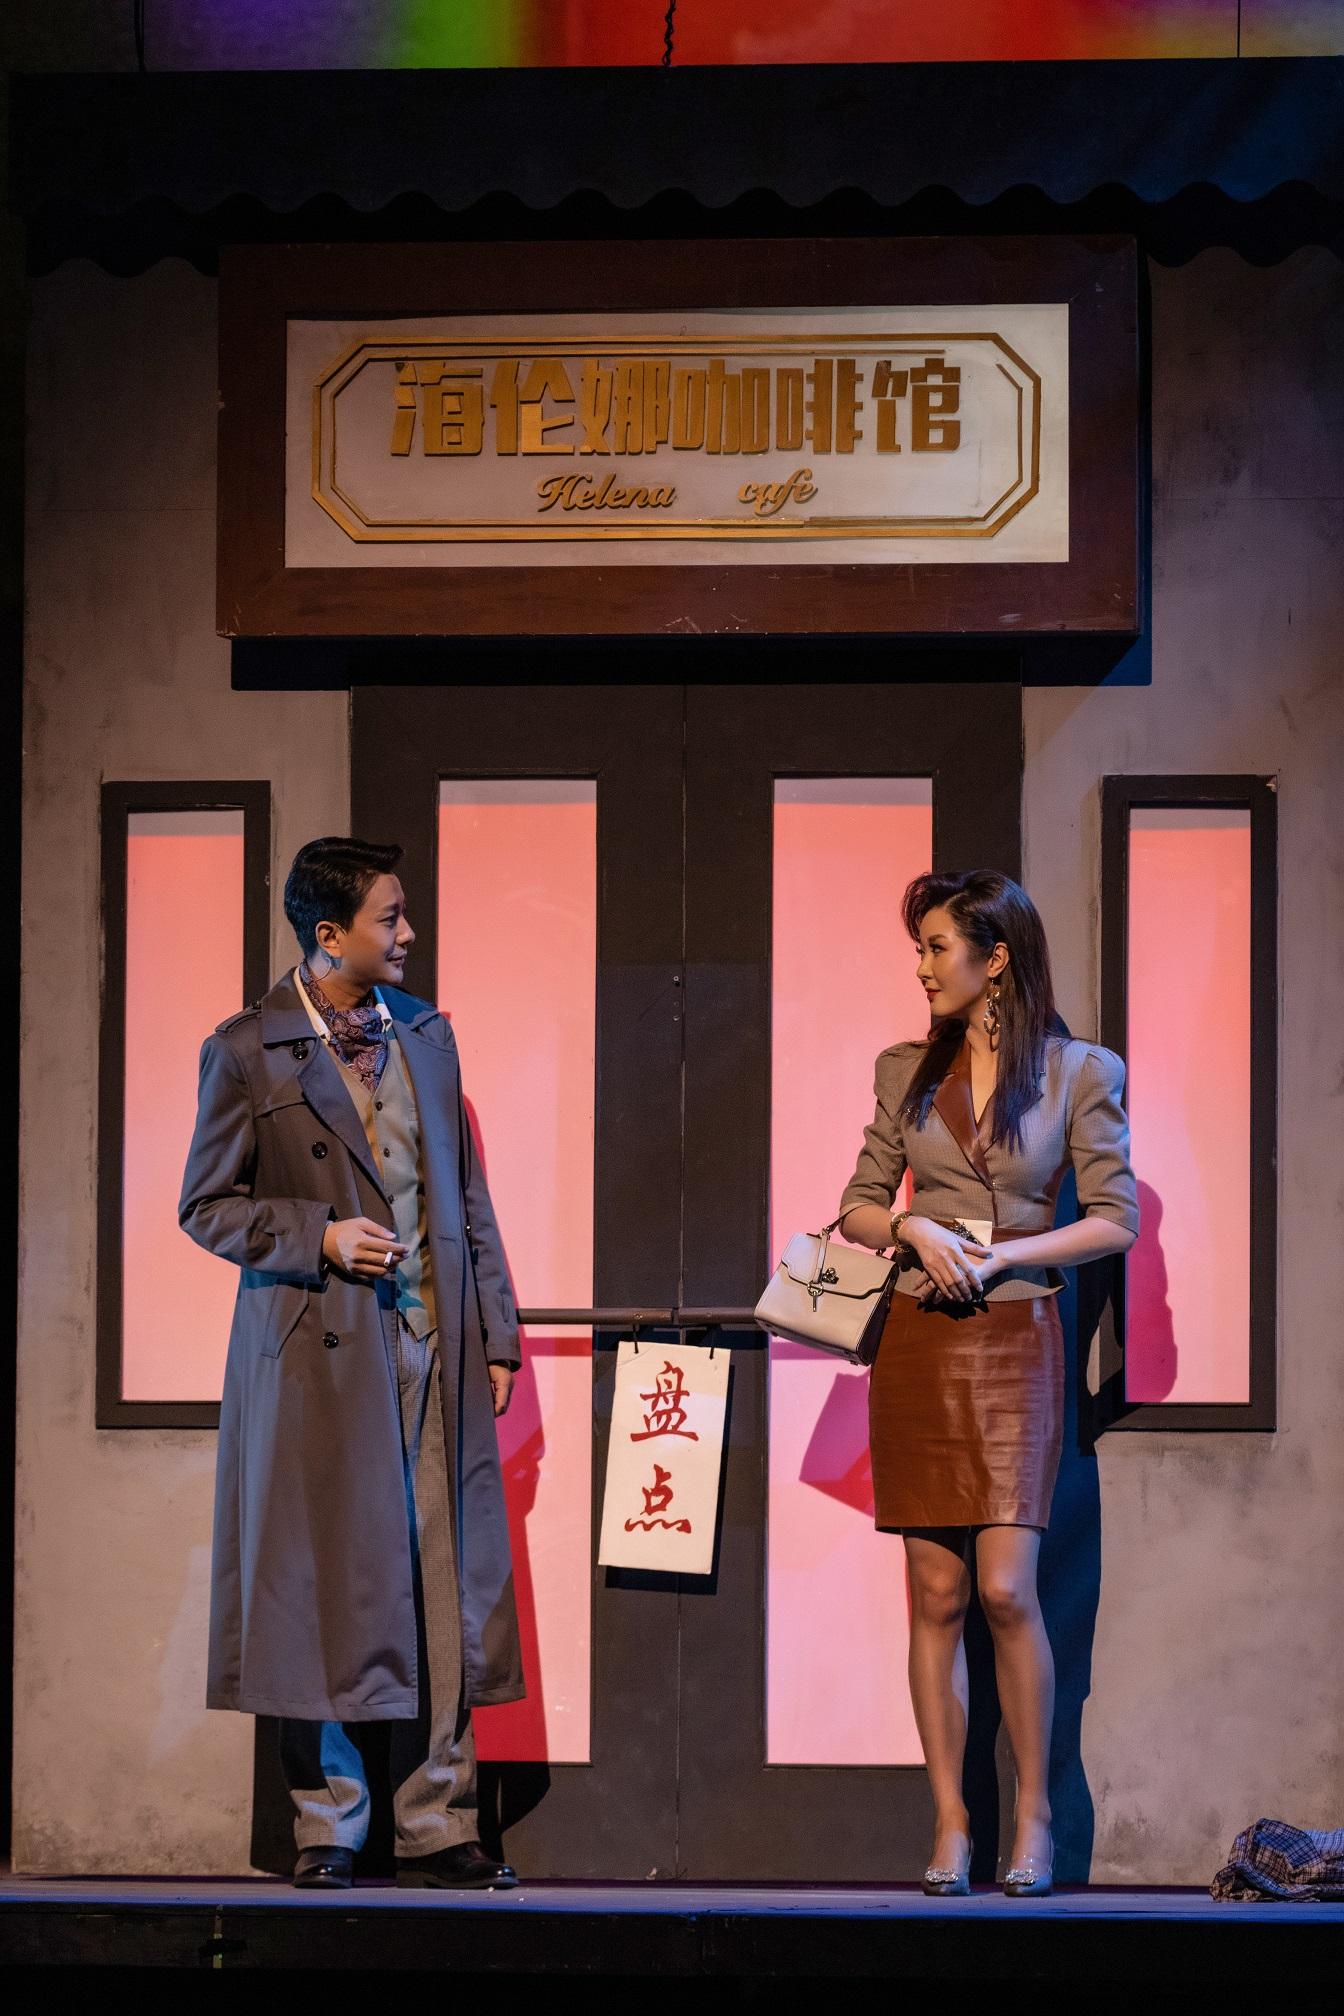 "Blossoms" (Part I), a theatre production in Shanghai dialect presented by the Leisure and Cultural Services Department, will make its debut in Hong Kong in late April at the Grand Theatre of the Hong Kong Cultural Centre. Photo shows a scene from "Blossoms" (Part I).